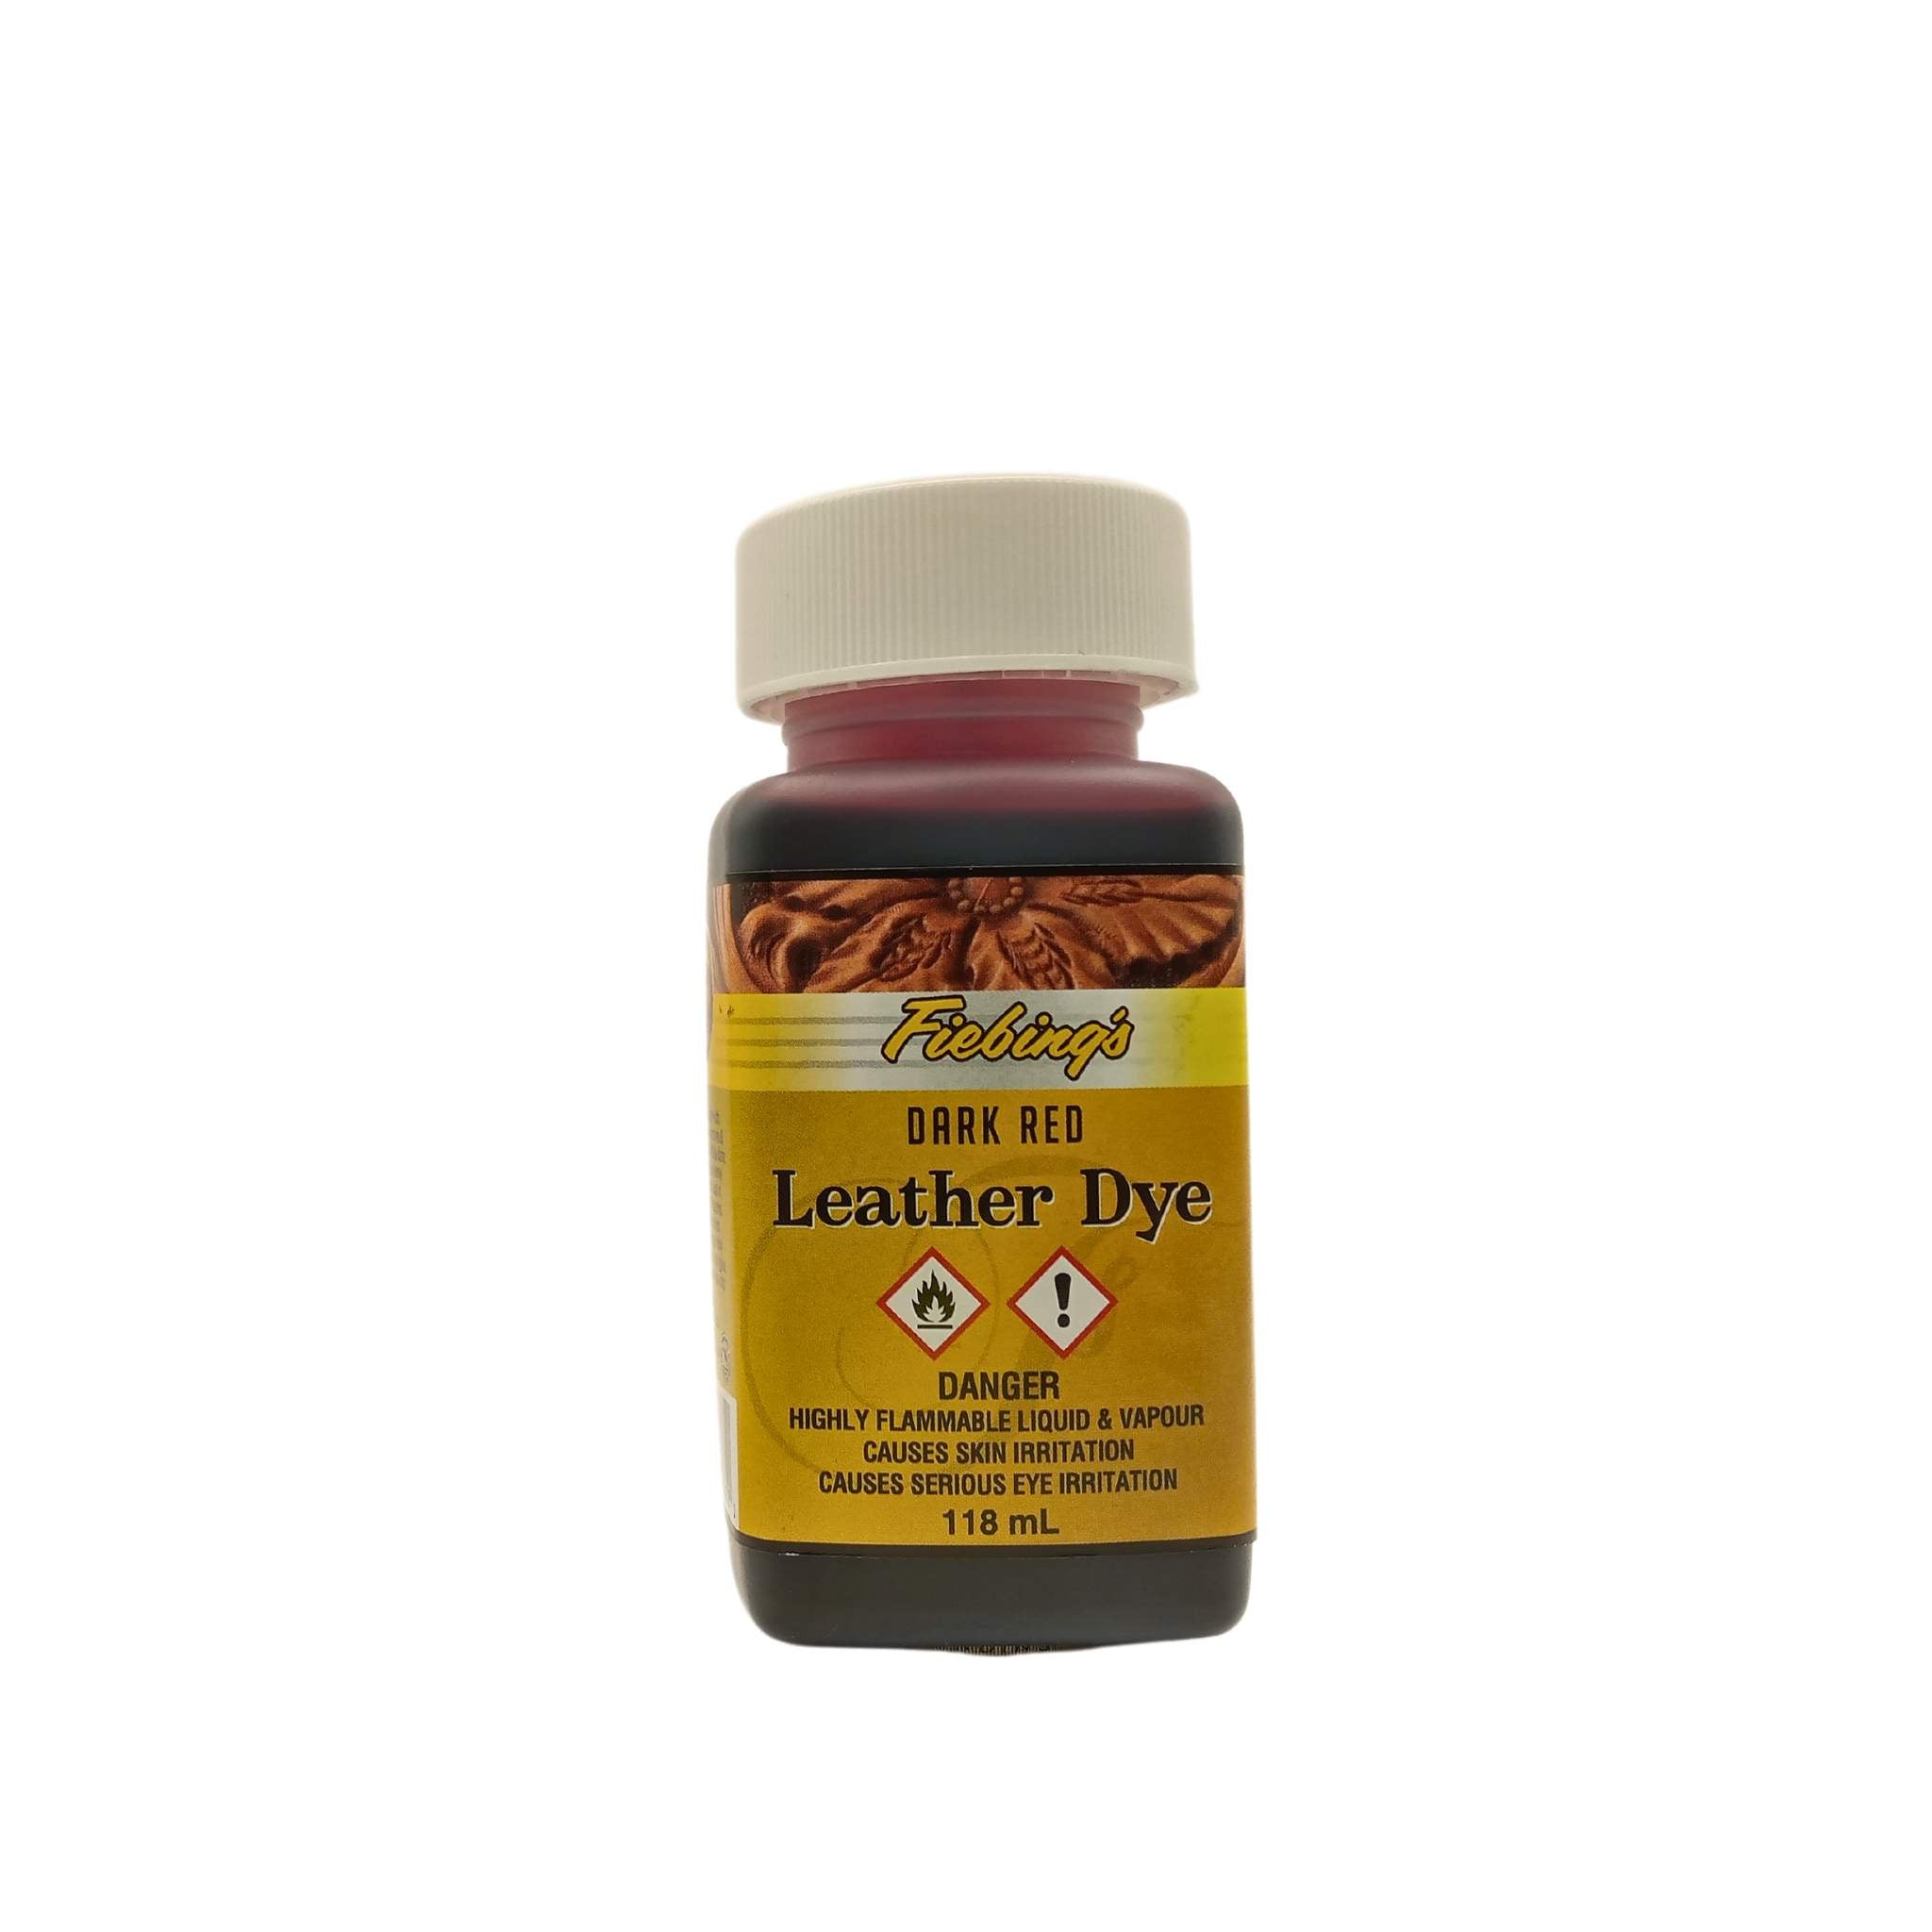 Dye your leathercraft projects with this Fiebing's solvent based leather dye - Dark Red